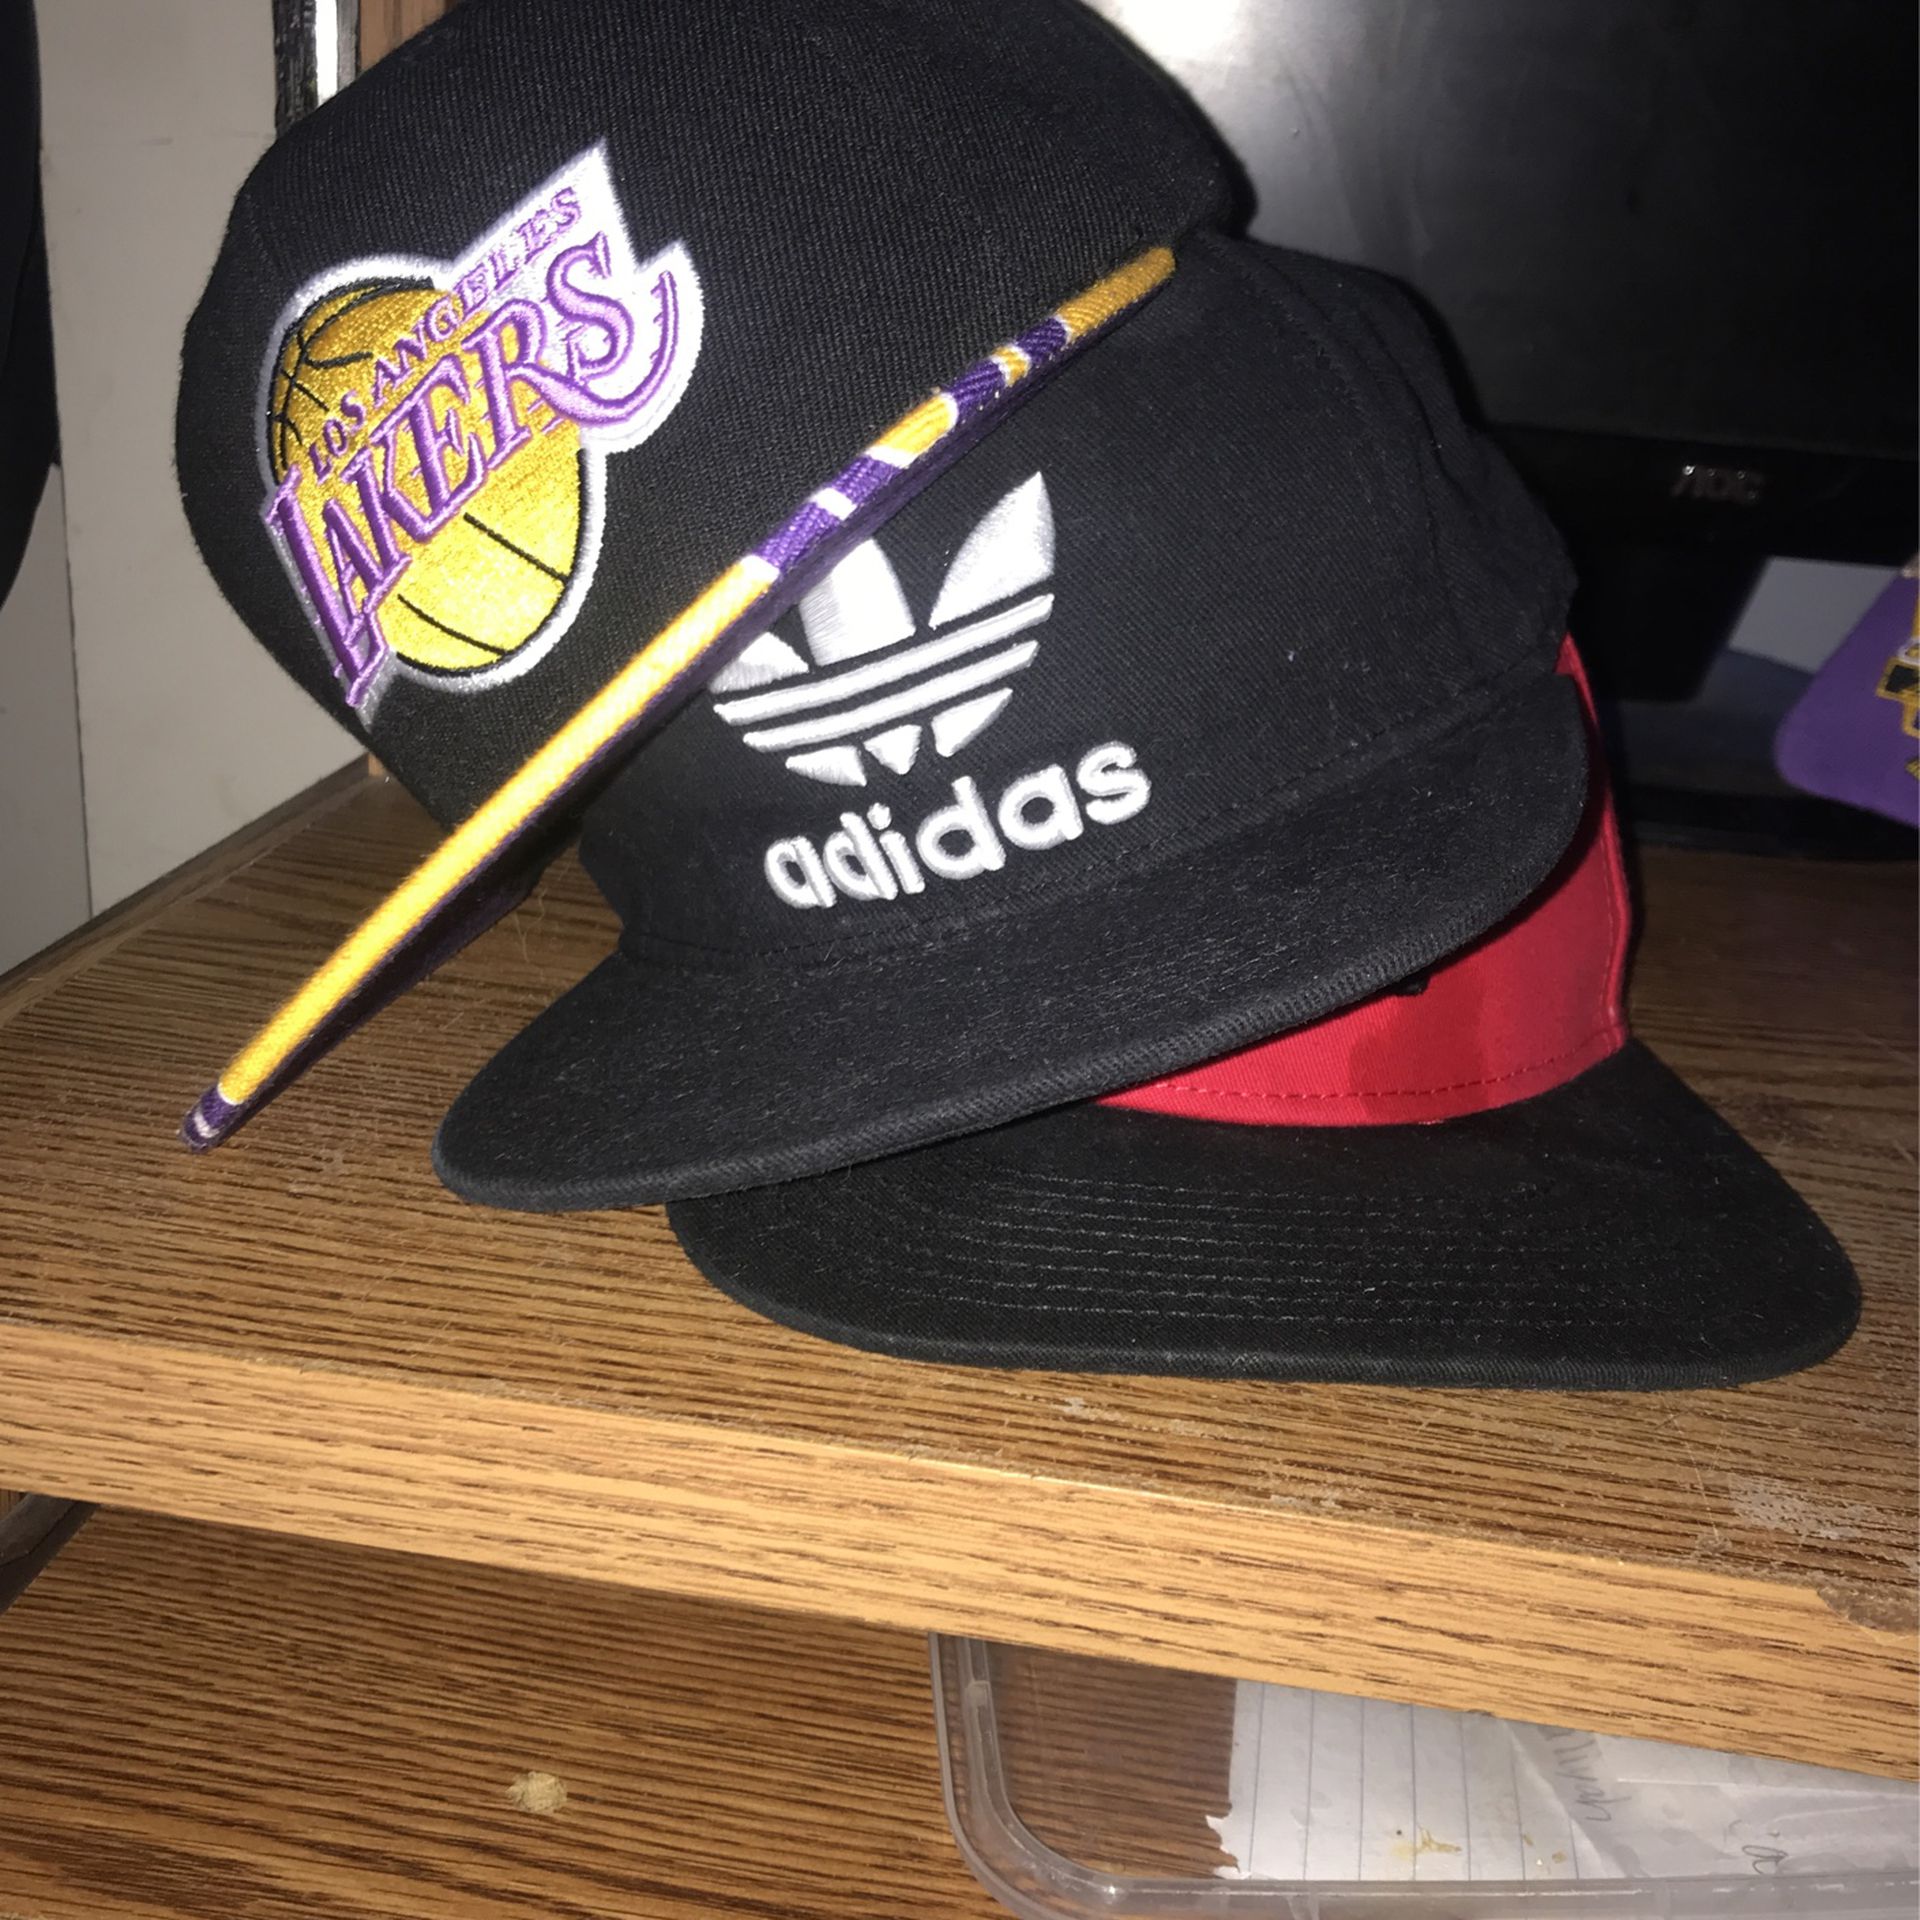 3 Hats, A Michell And Ness Lakers Hat, A Adidas Hat And A NEFF Hat